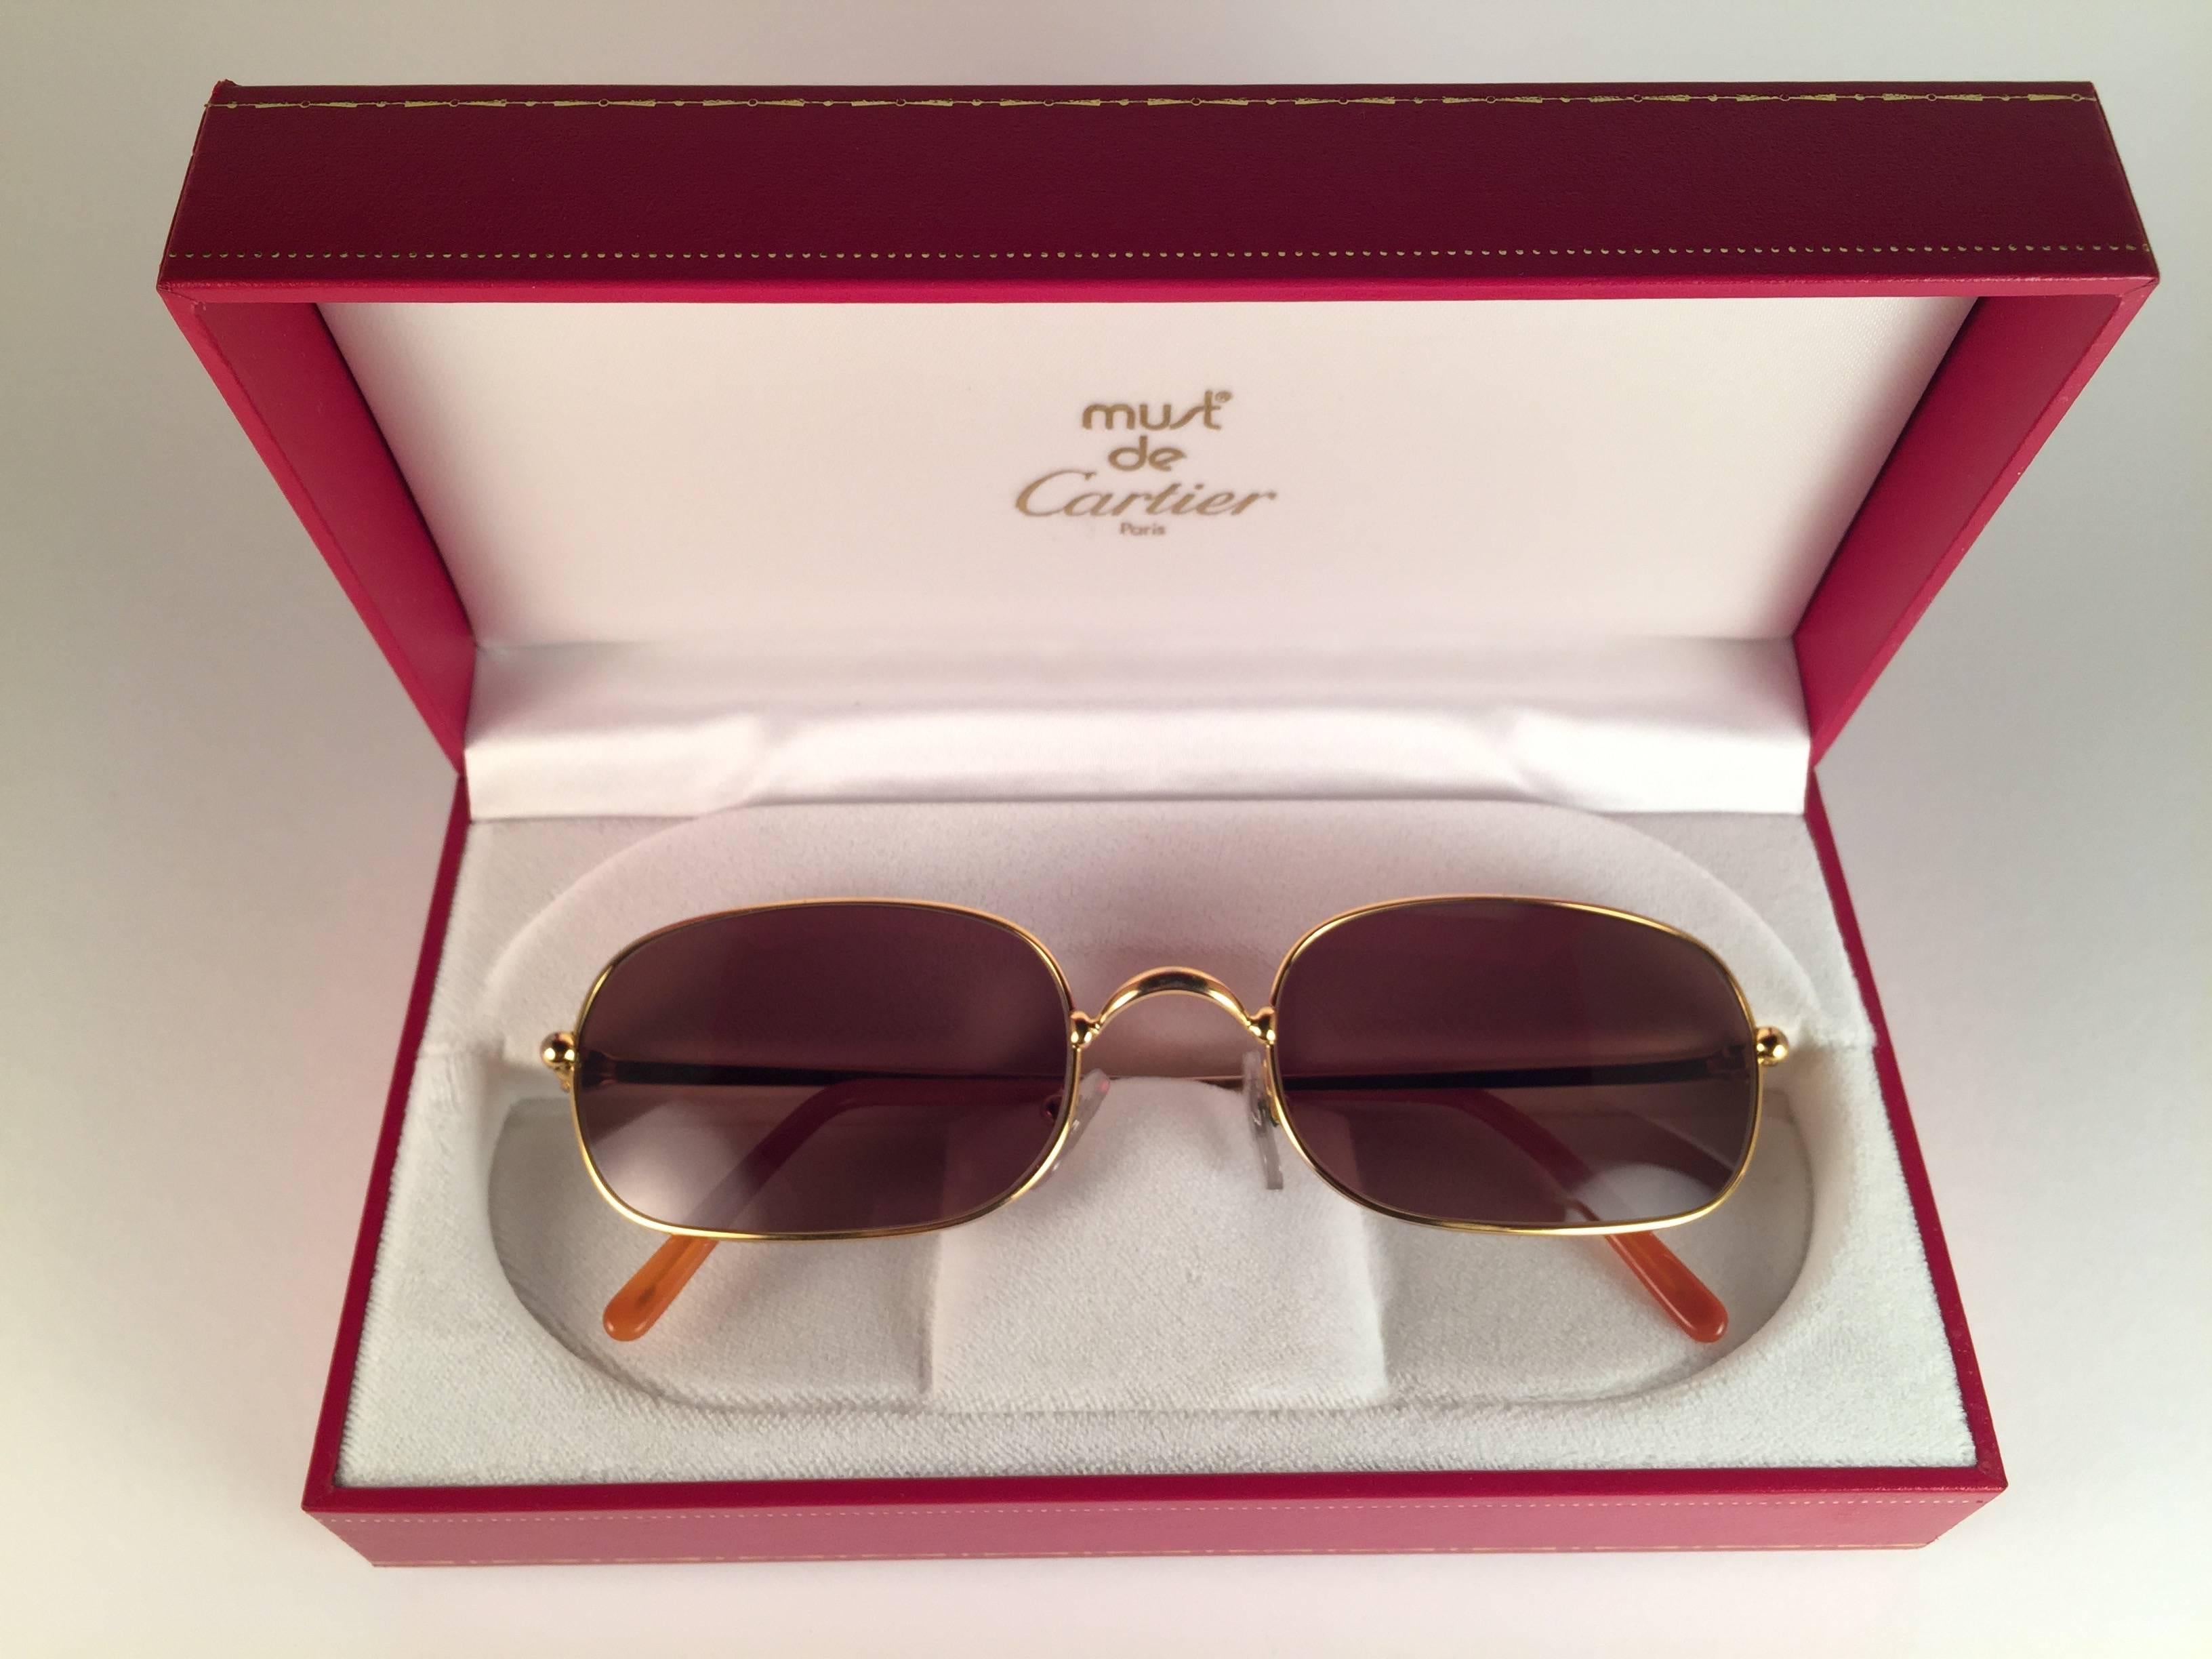 Mint 1990 Cartier DeimIos 52 MM Sunglasses with brown (uv protection) lenses.  All hallmarks. Cartier gold signs on the ear paddles. These are like a pair of jewels on your nose. Beautiful design and a real sign of the times. Original Cartier hard